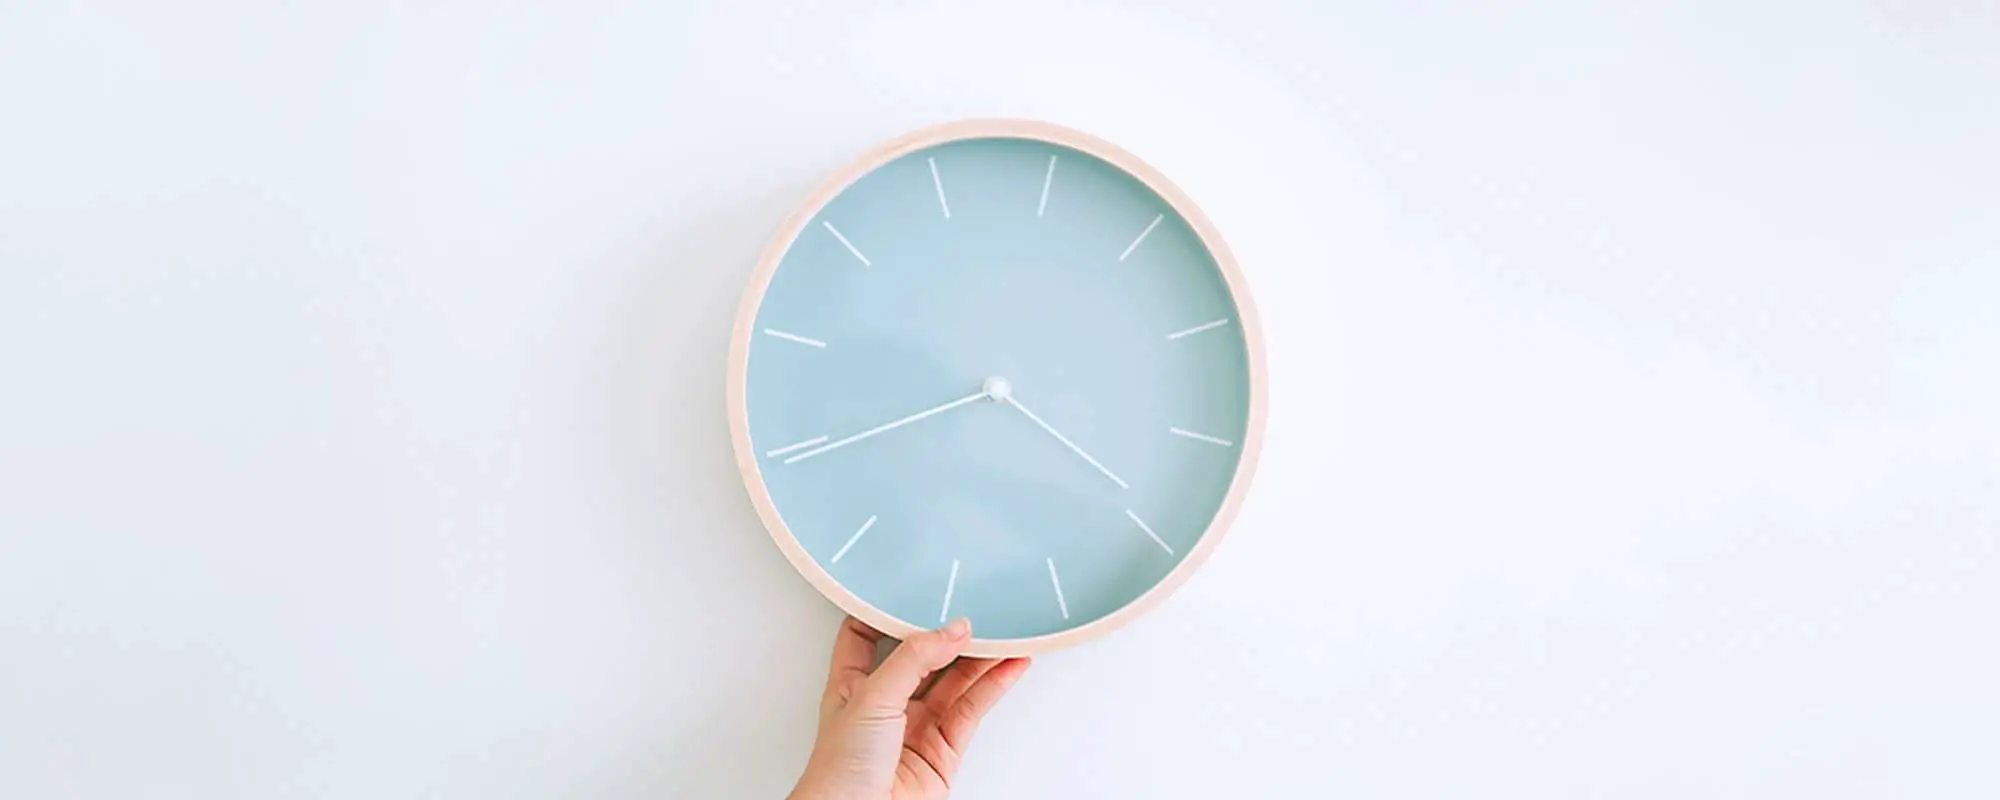 How Does Intermittent Fasting Affect Your Body?